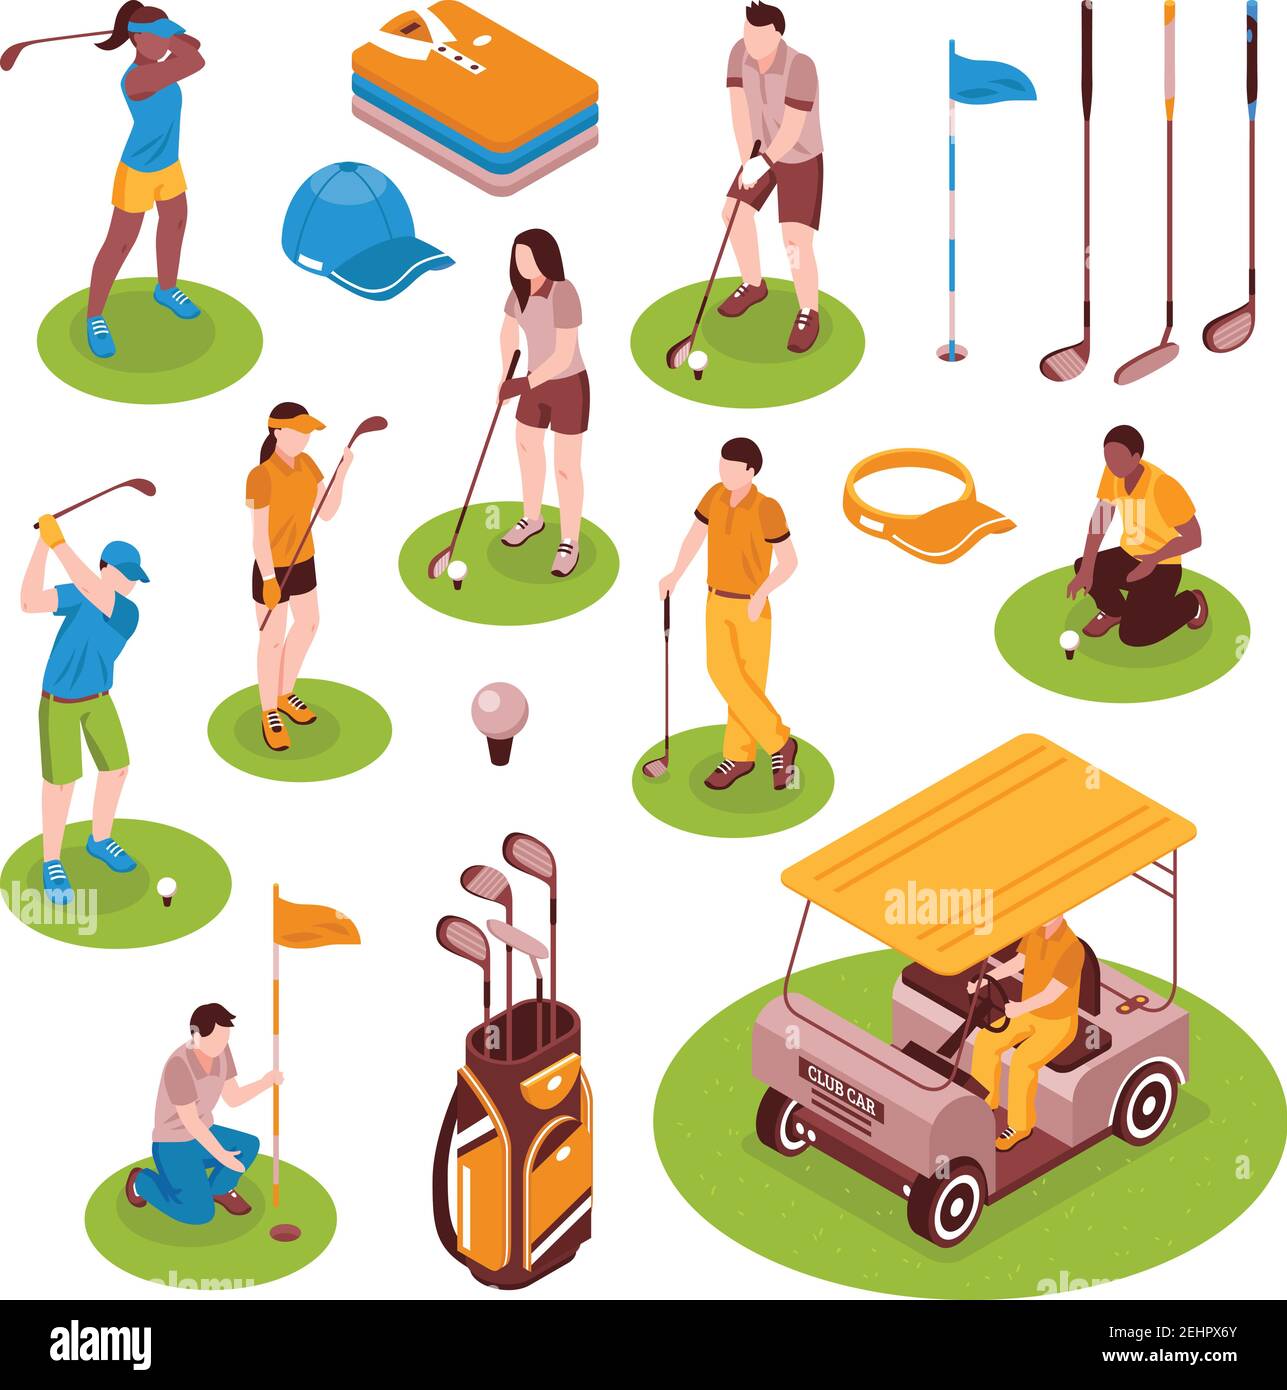 Golf isometric icons set with equipment symbols isolated vector illustration Stock Vector